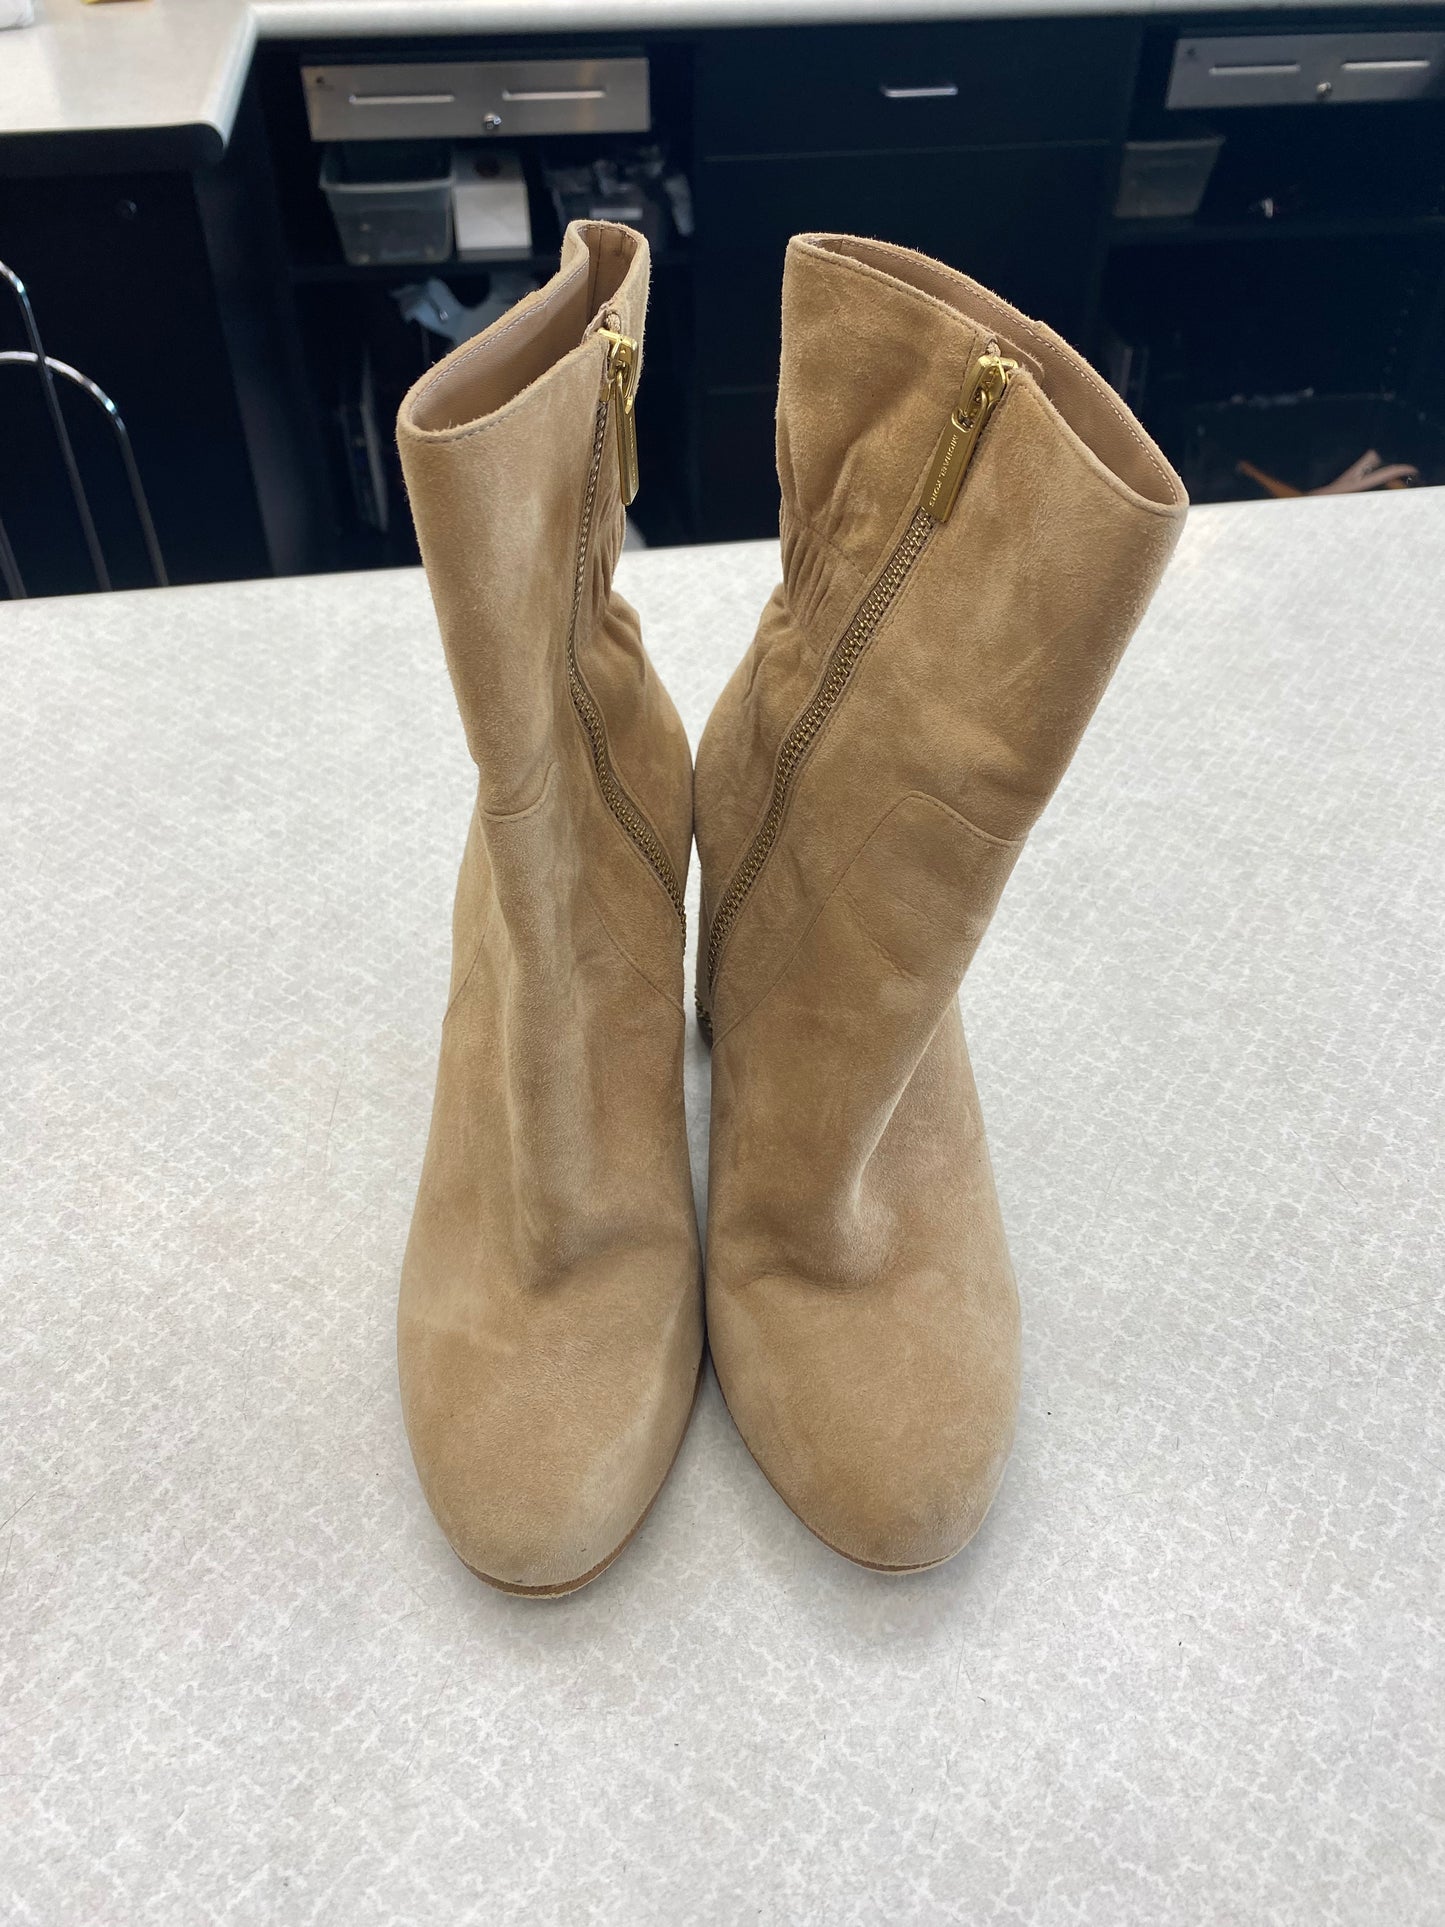 Boots Ankle Heels By Michael By Michael Kors  Size: 6.5